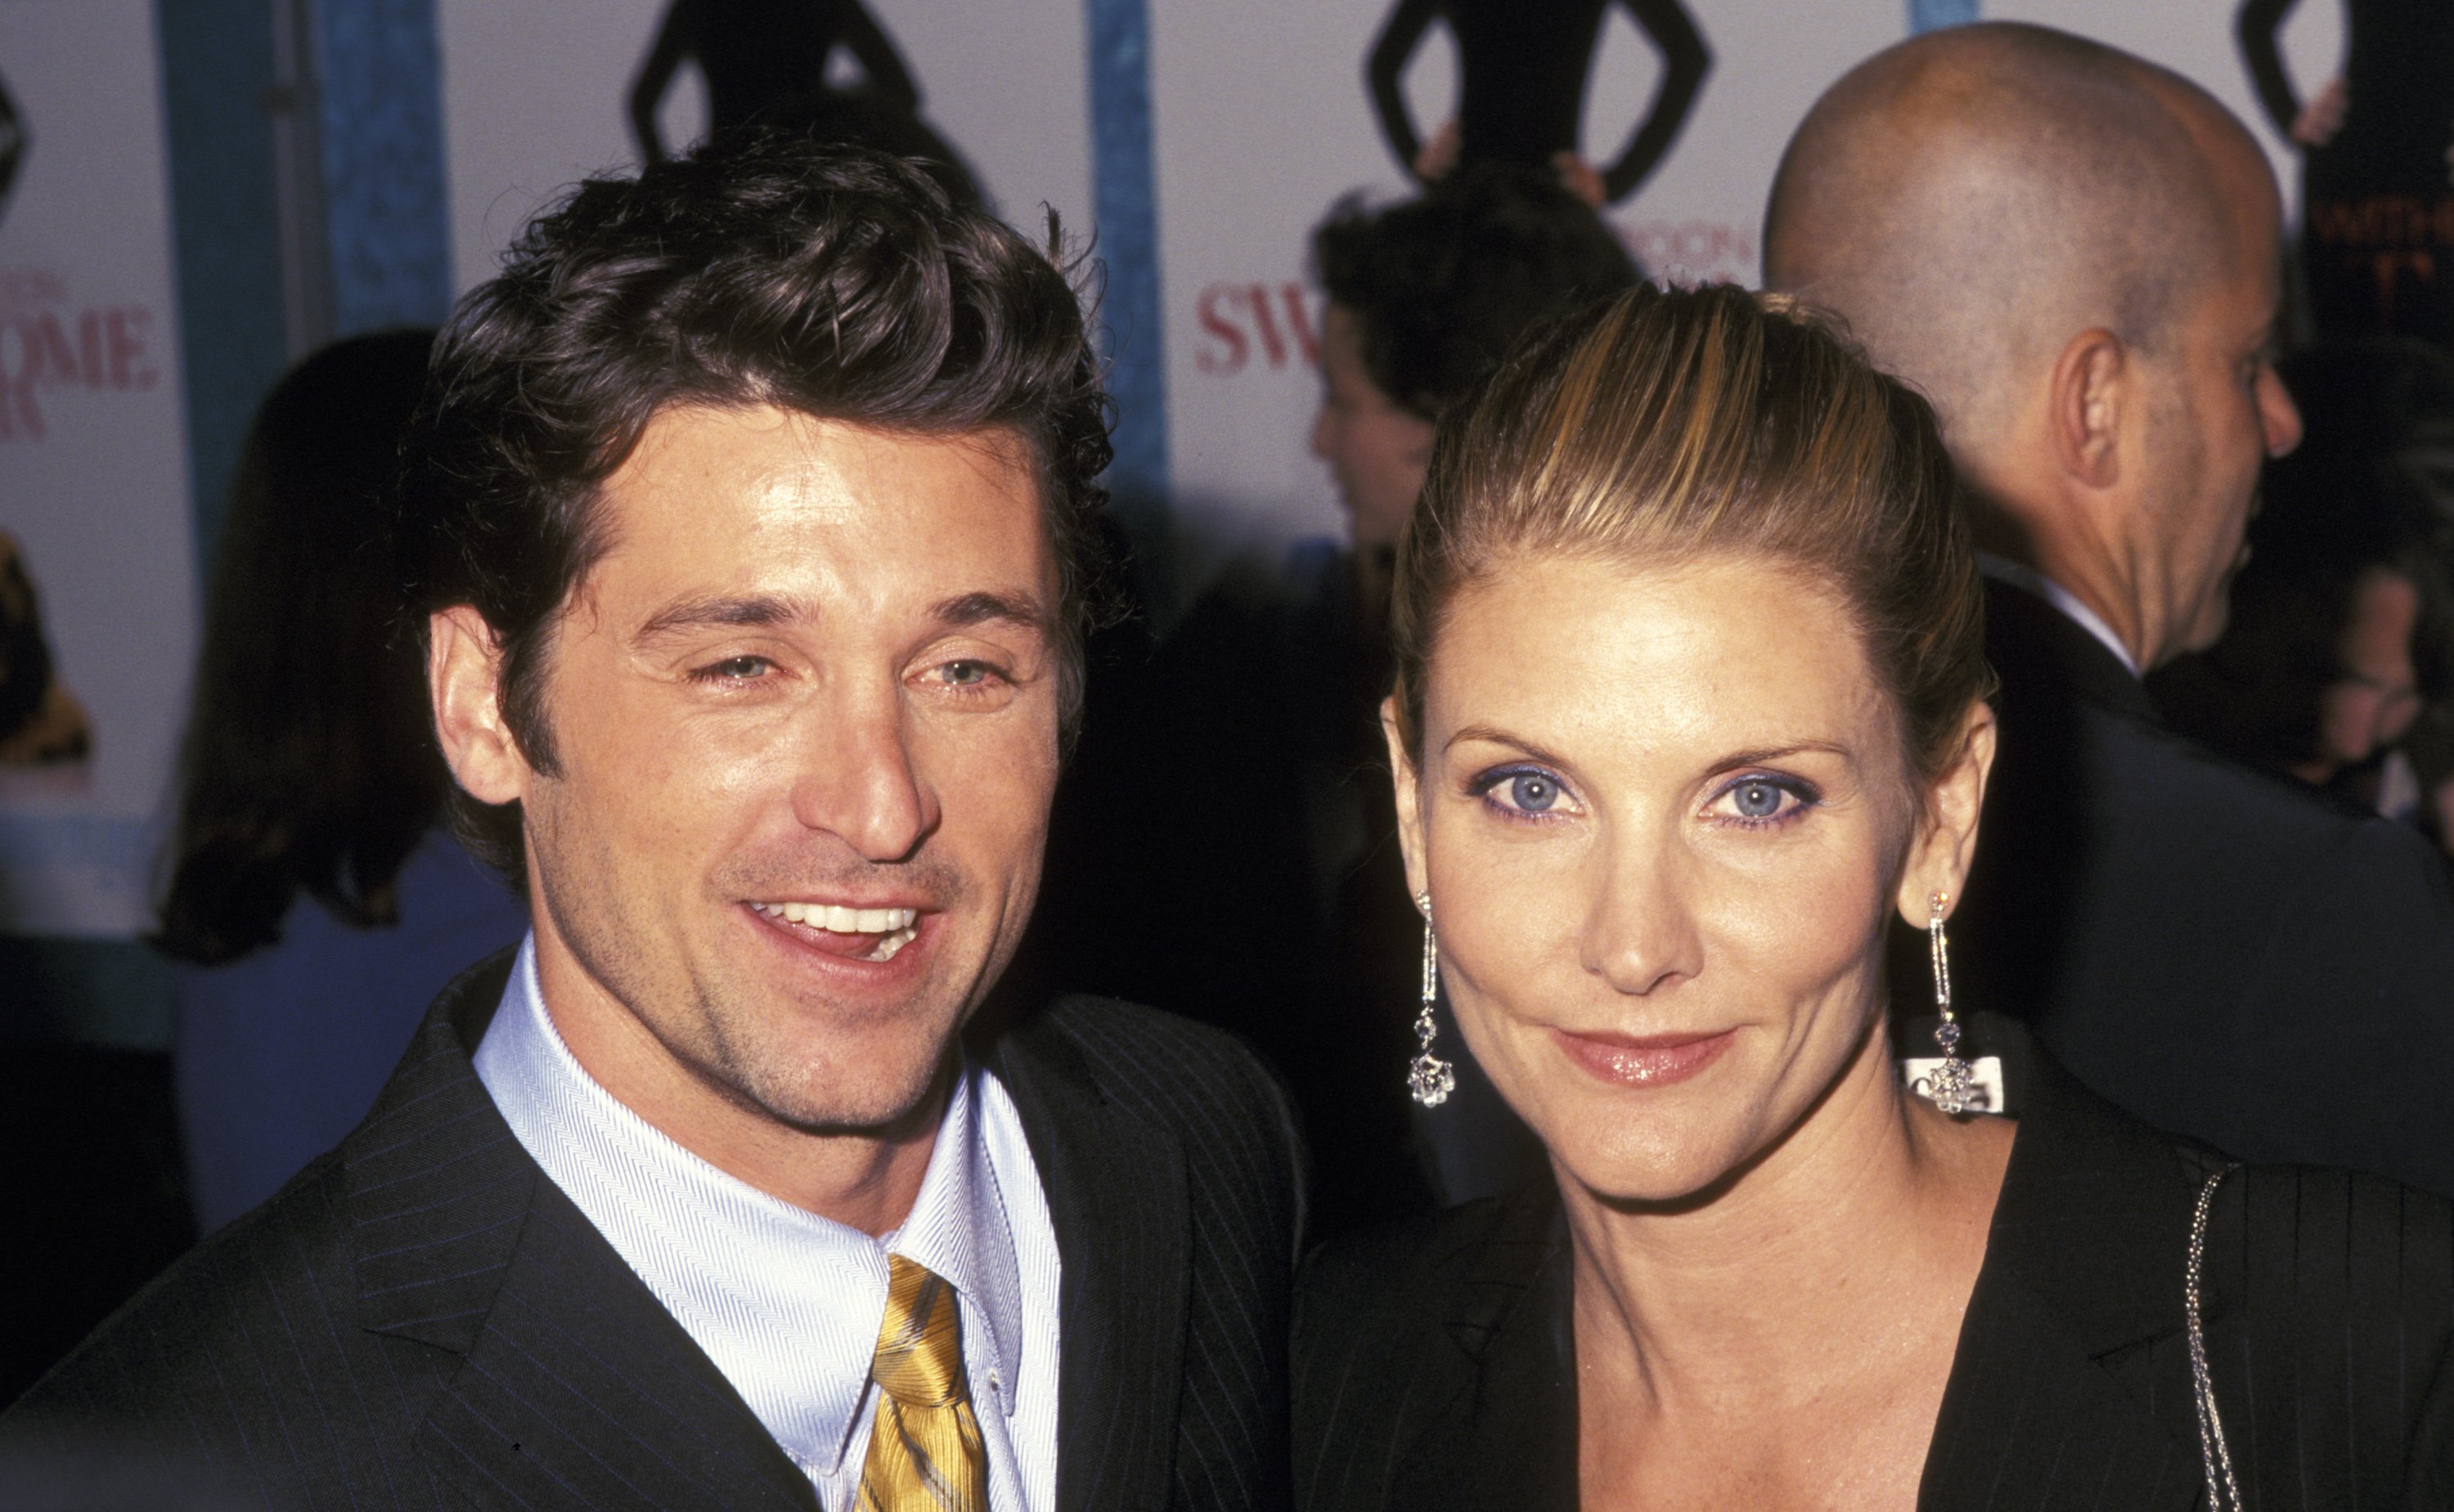 Actor Patrick Dempsey and his wife, makeup artist Jillian Fink during the premiere of "Sweet Home Alabama" at Chelsea West Cinema on September 23, 2002 in New York City┃Source: Getty Images